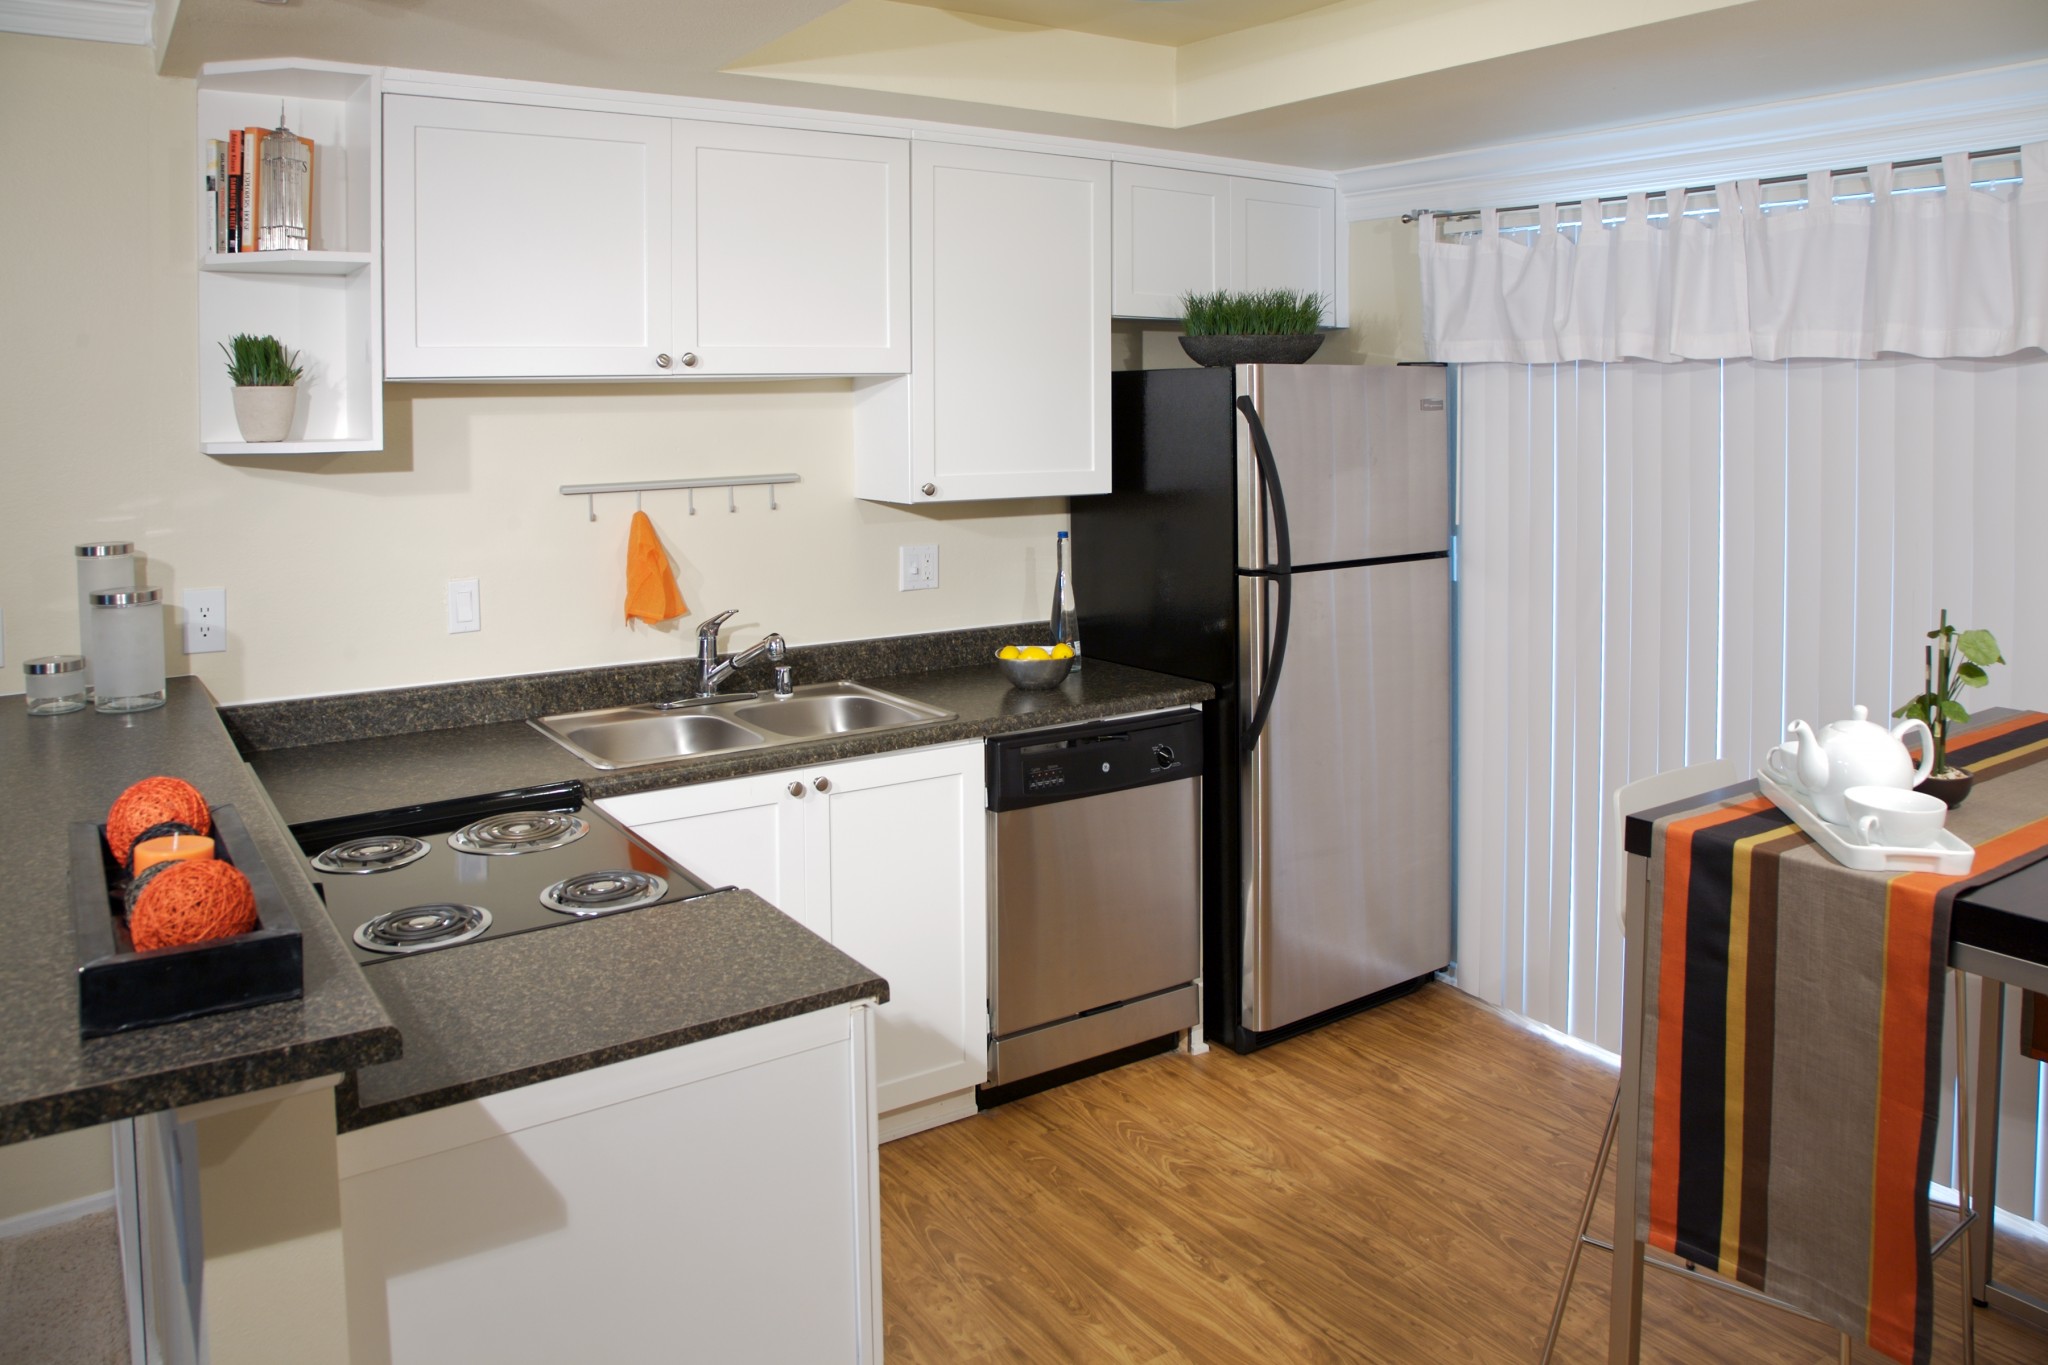 Apartment kitchen with stainless steel appliances, black countertop and white cabinets..